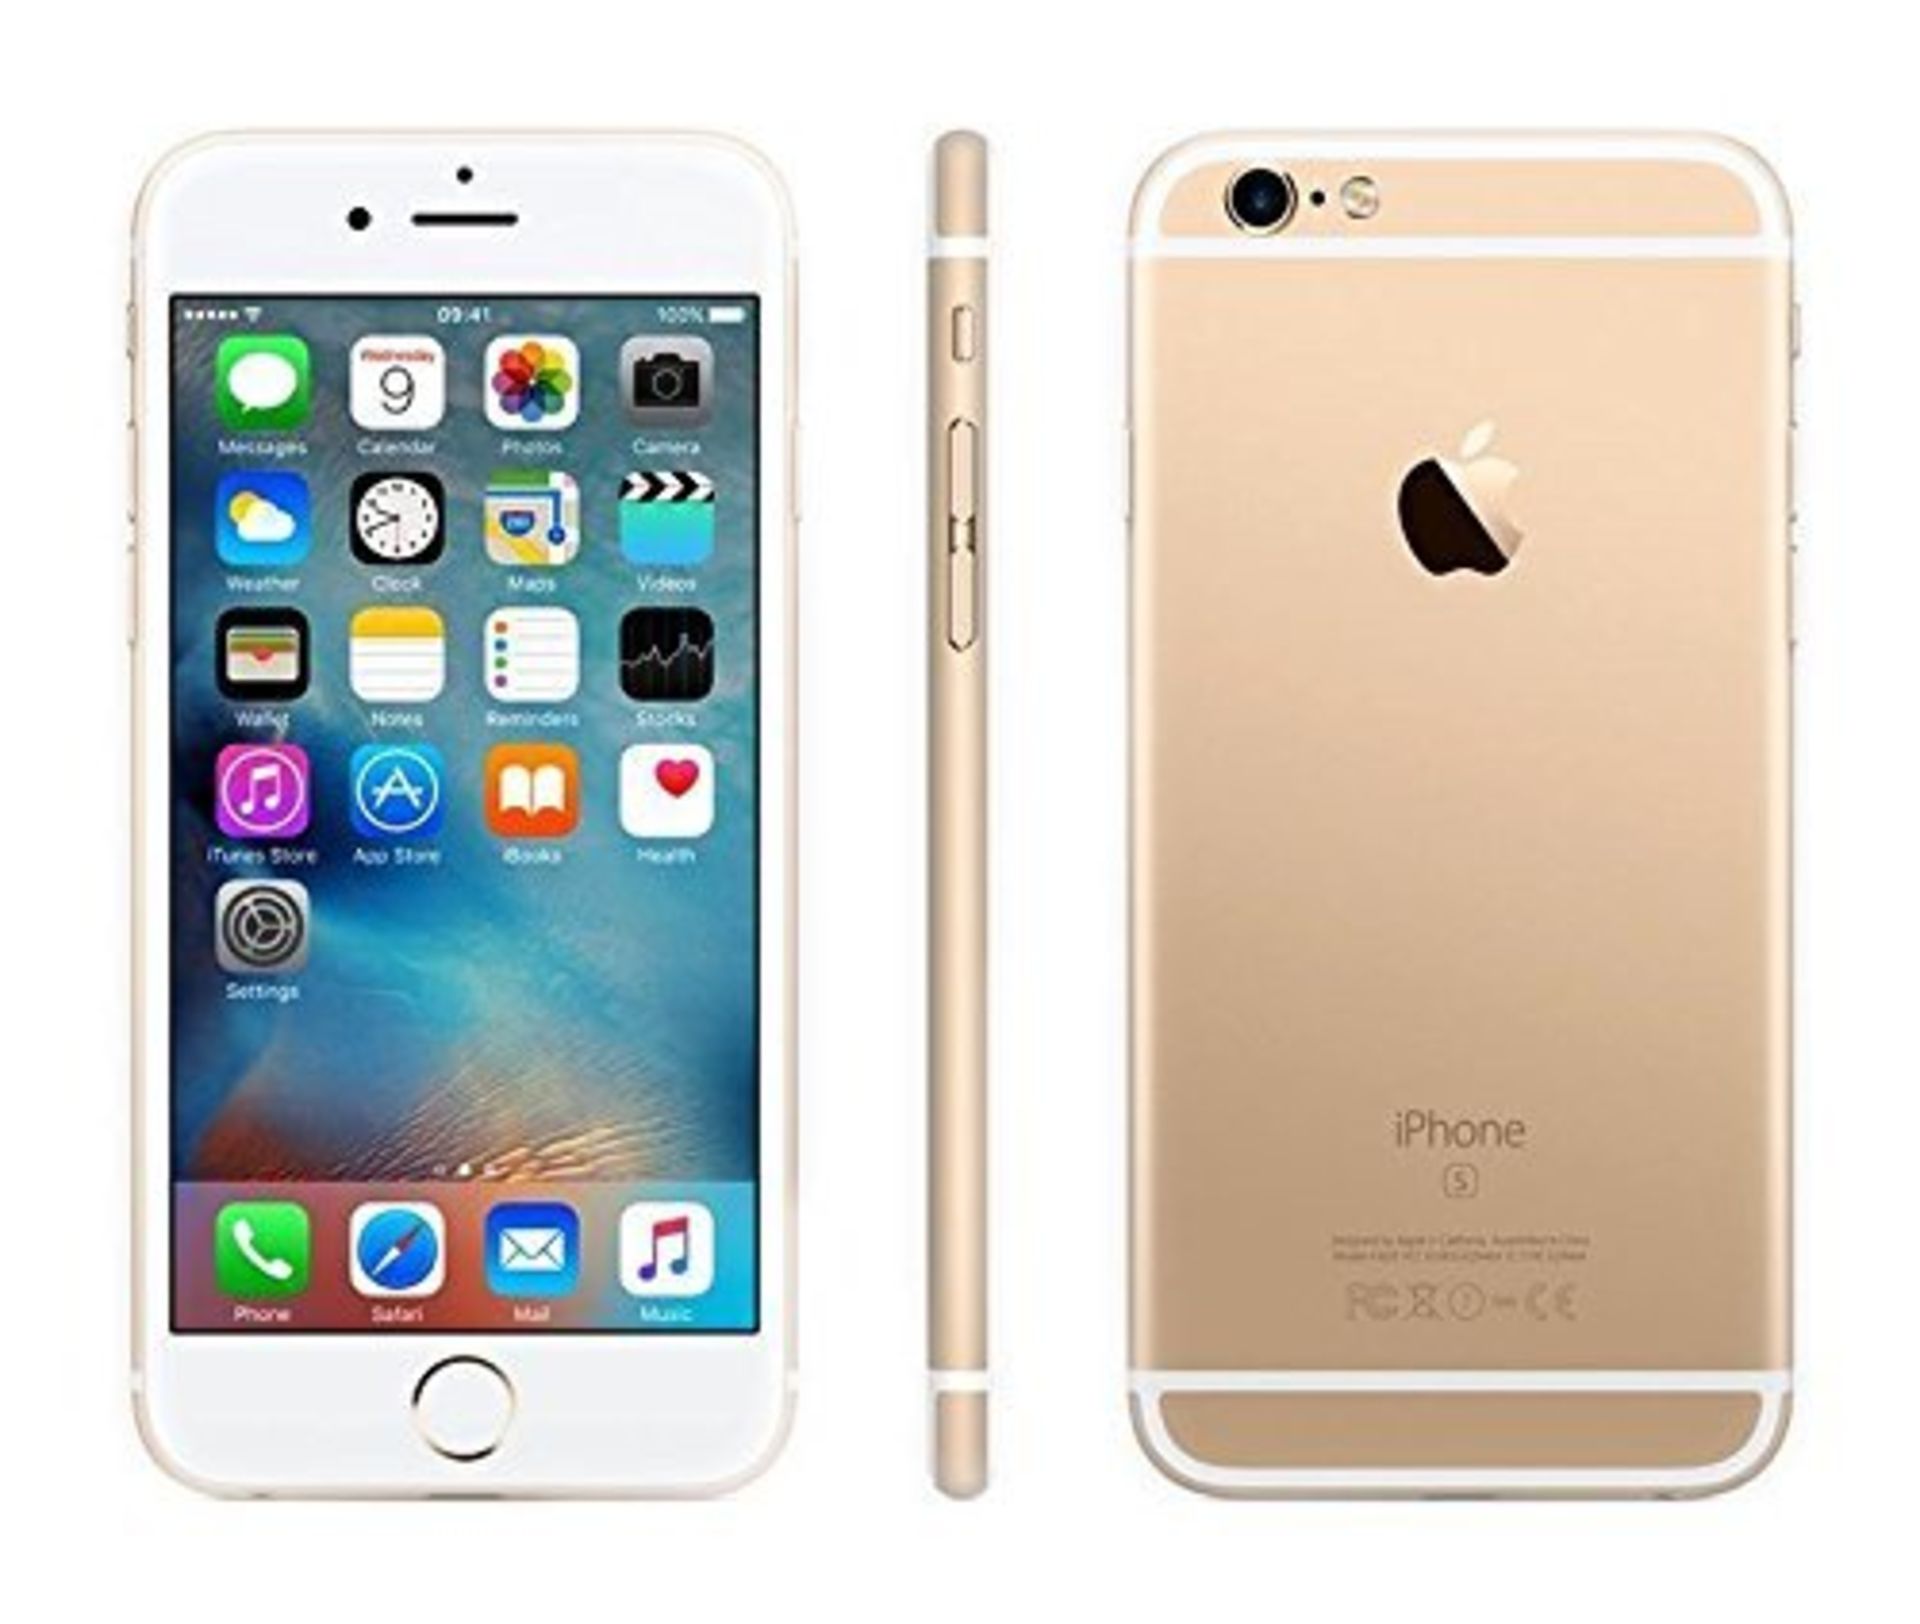 Grade A Apple iphone 6 128GB Colours May Vary Touch ID Item available approx 15 working days after